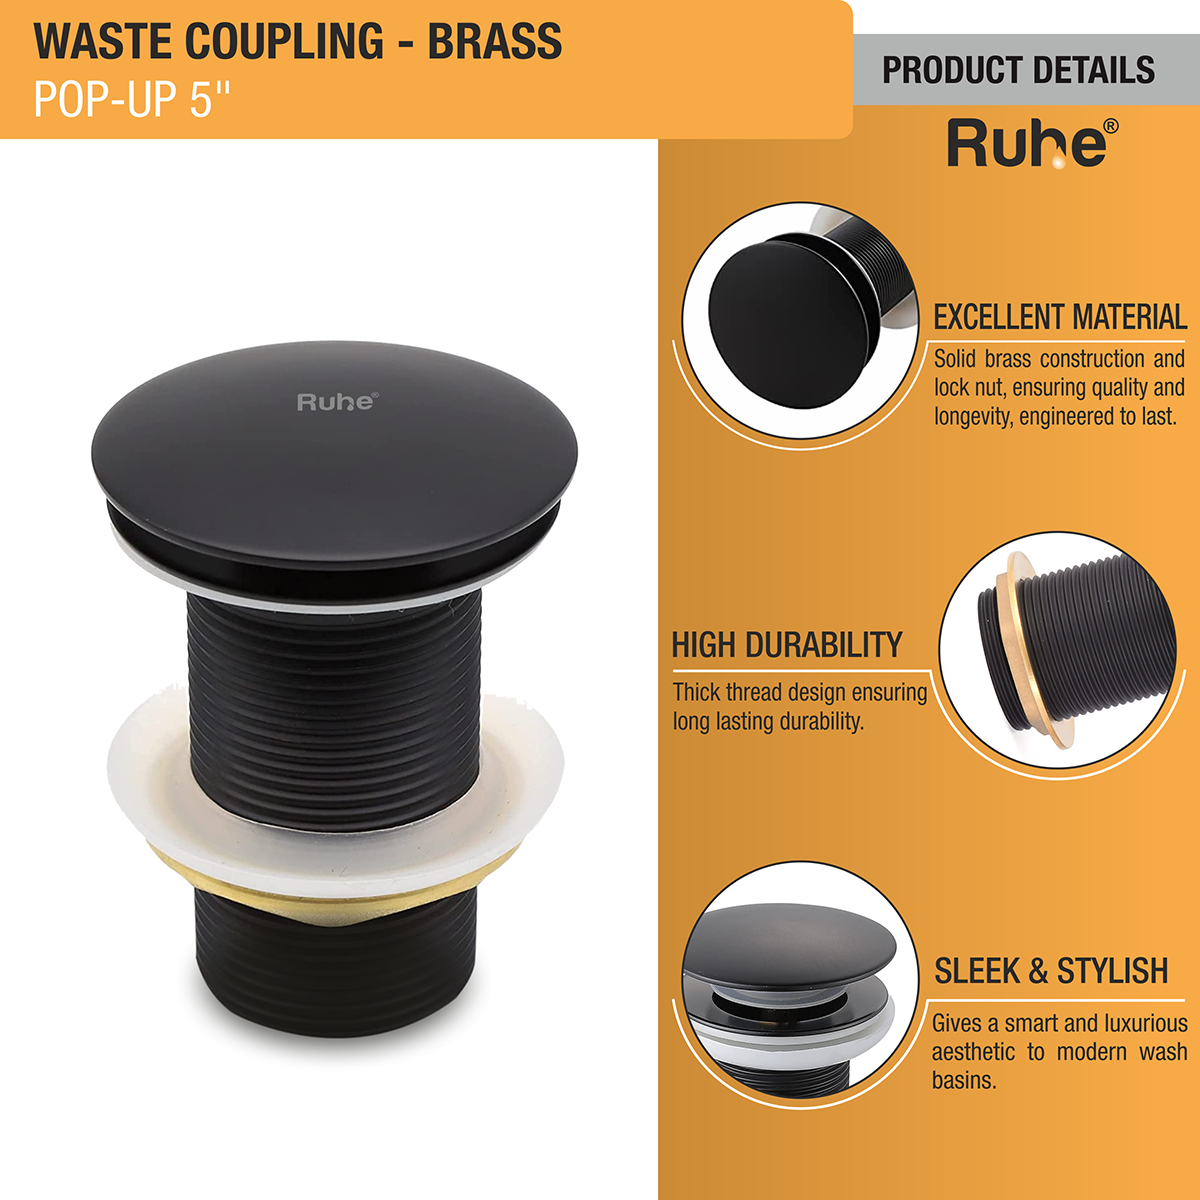 Pop-up Waste Coupling in Matte Black PVD Coating (5 Inches) product details